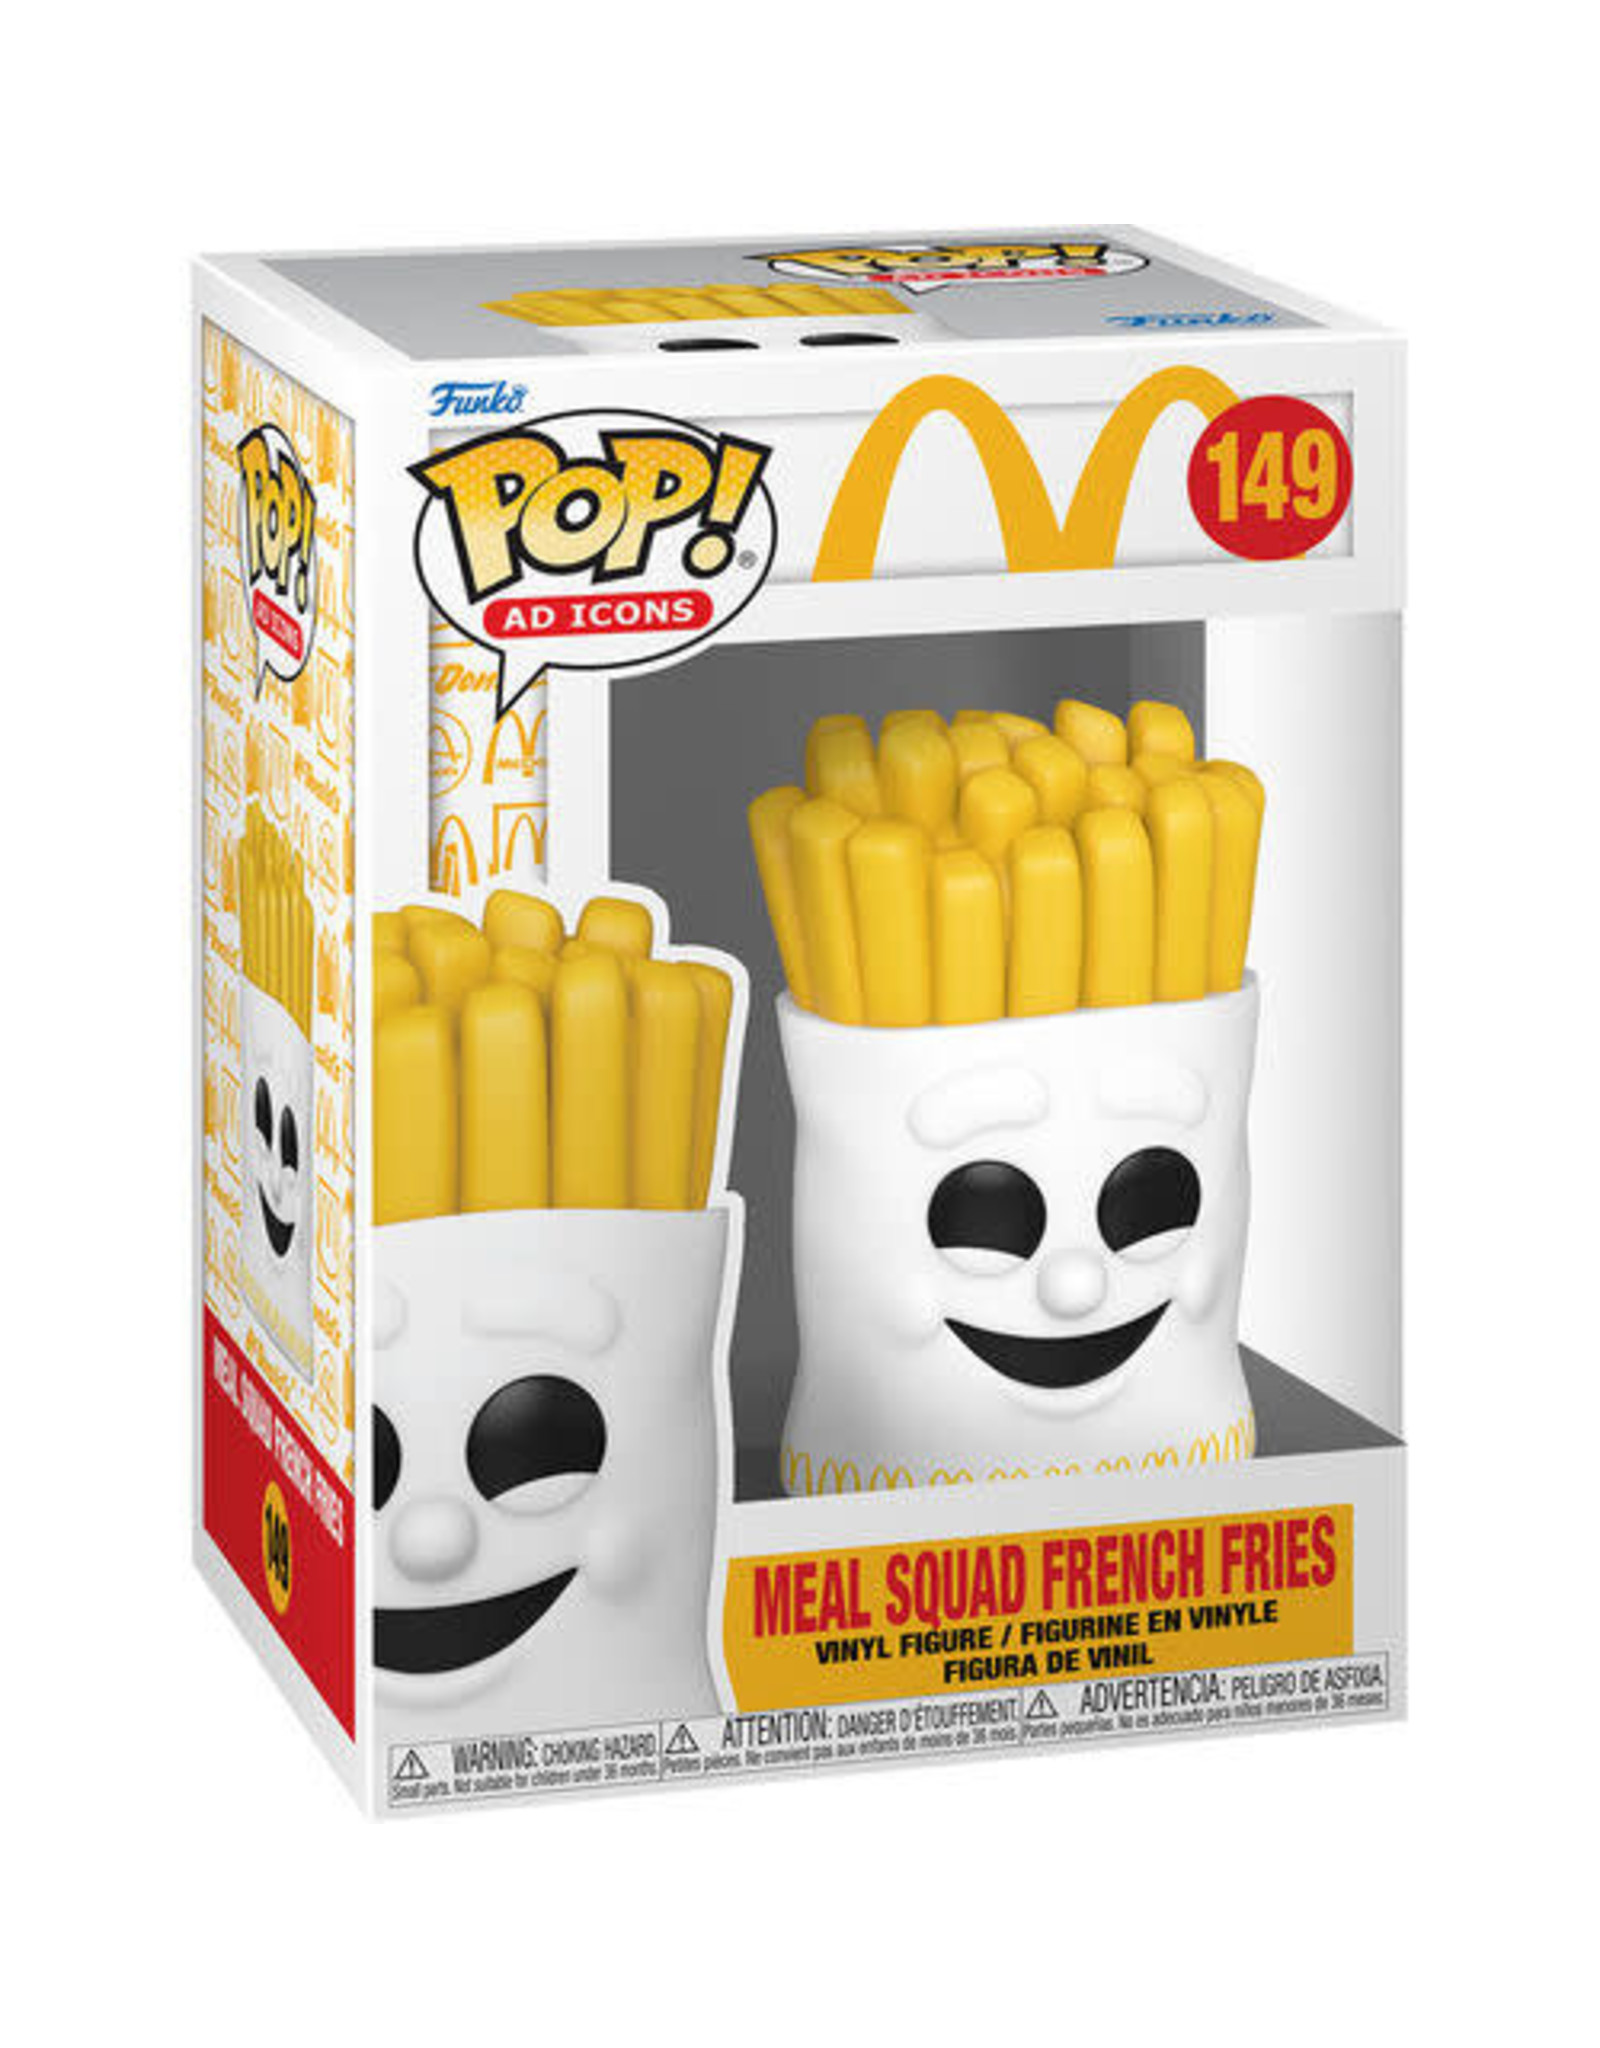 Funko Pop Vinyl Icons McDonalds Meal Squad French Fries